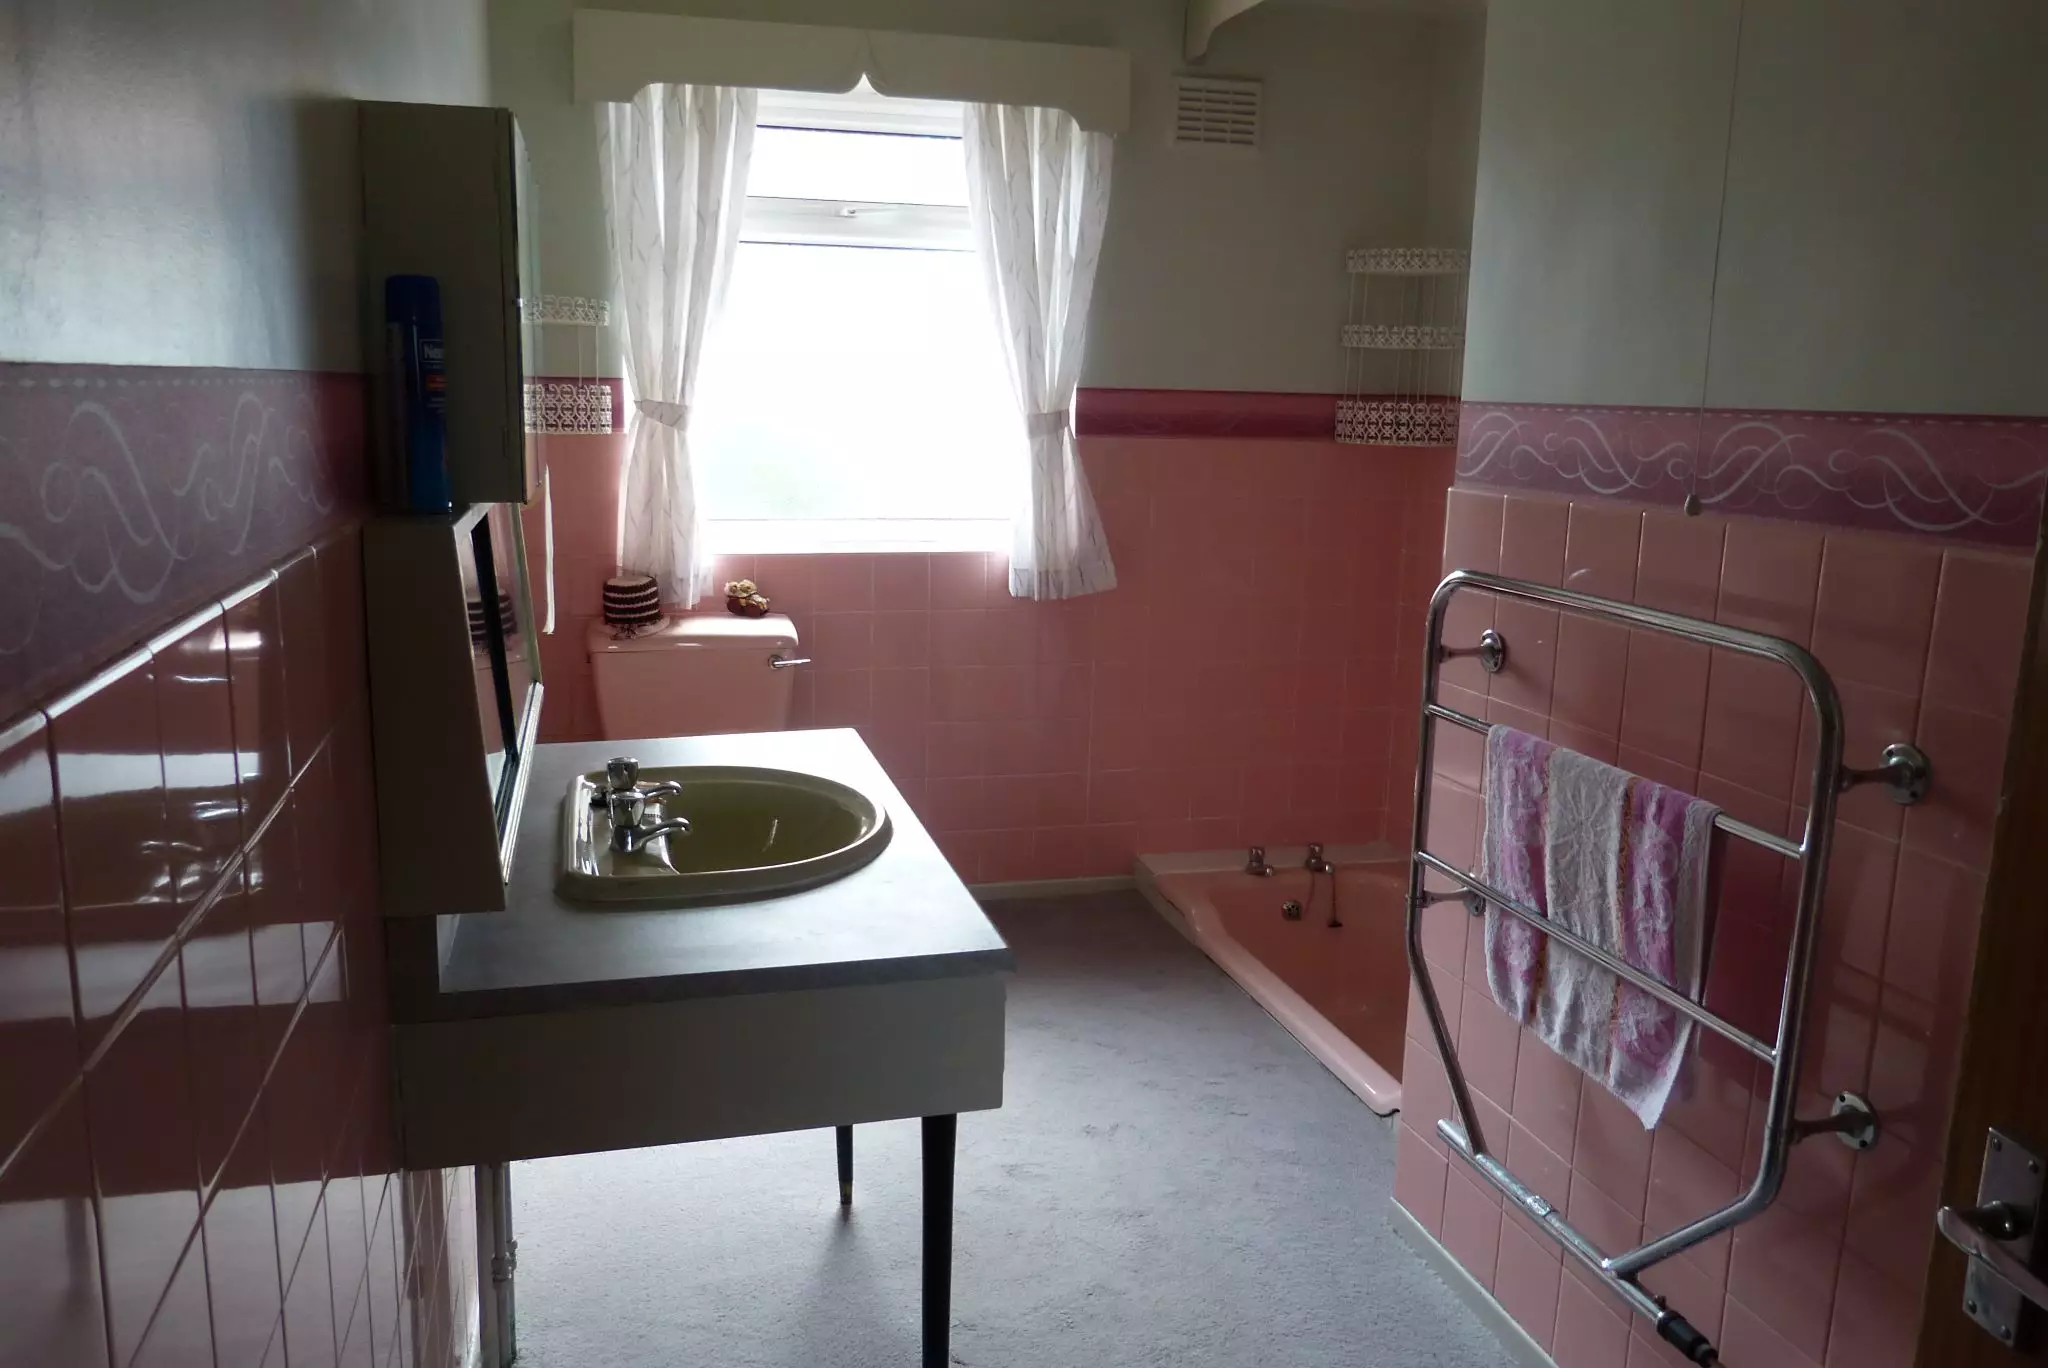 The bathroom features a pink suite and sunken bath.